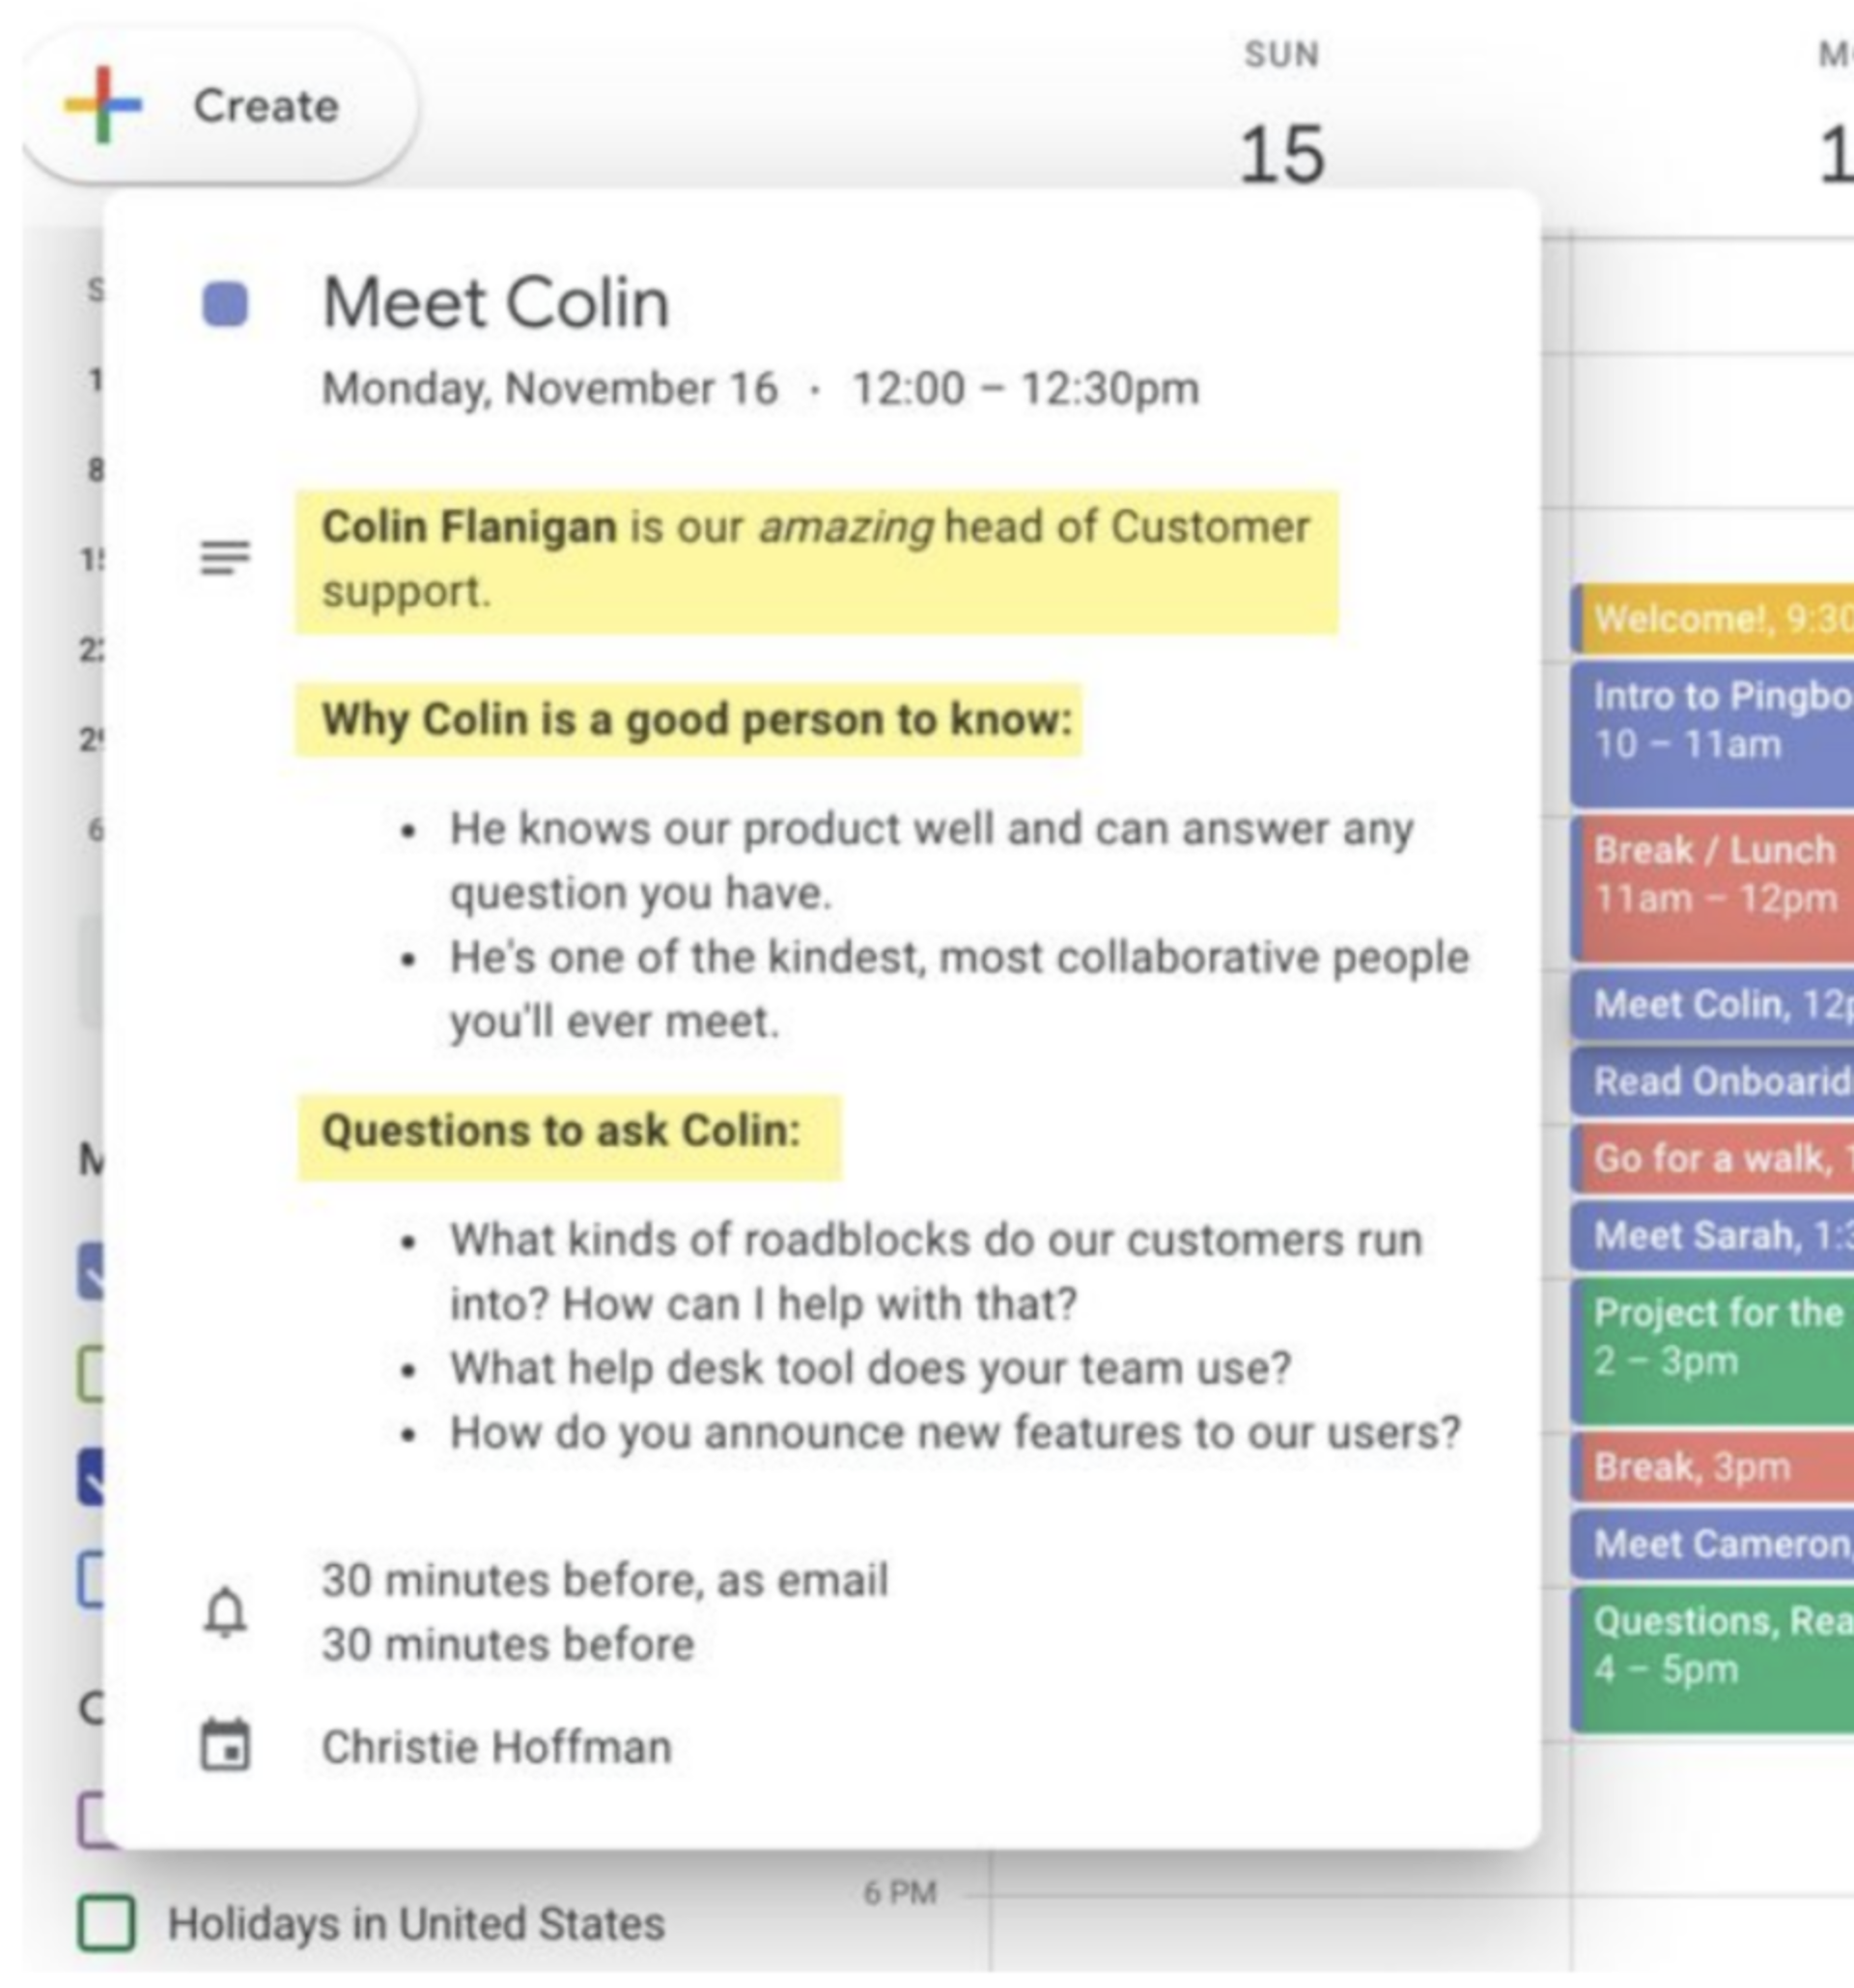 Google Calendar event to meet with Colin, including lots of meeting notes and questions